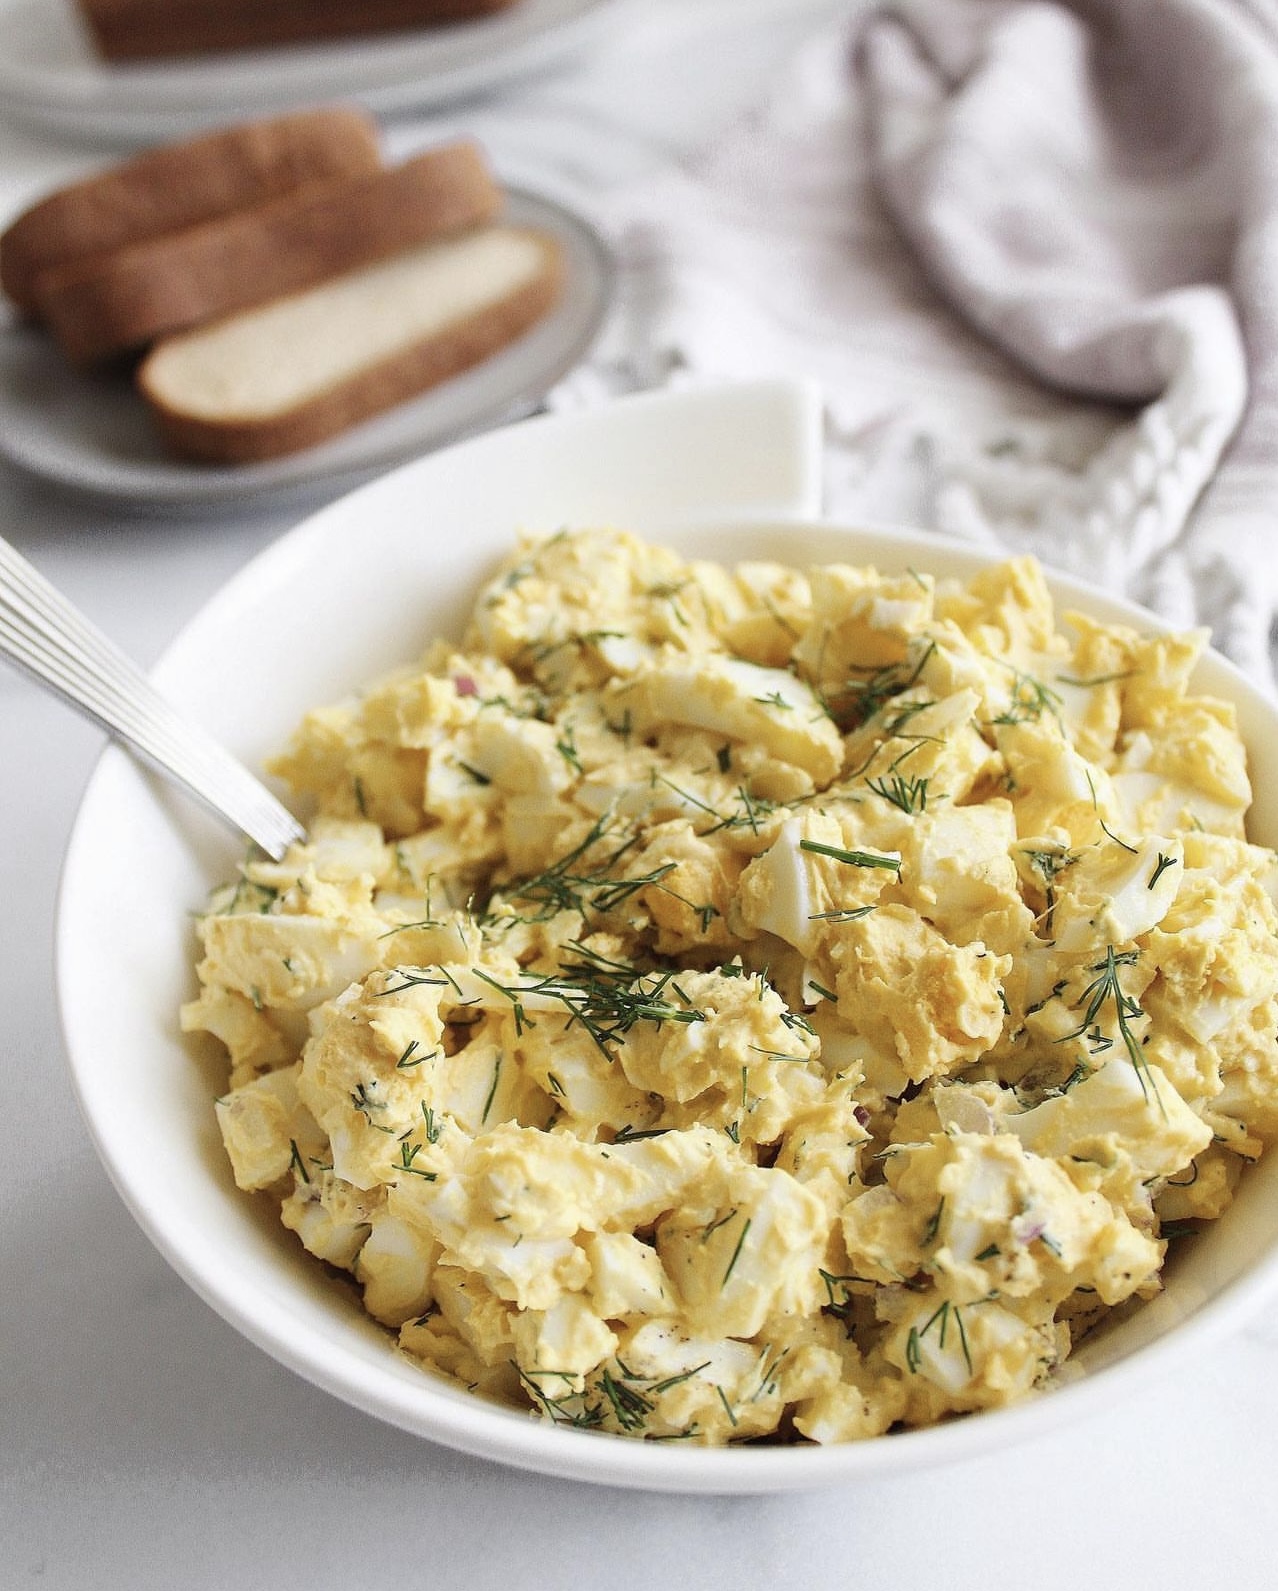 Egg Salad in a bowl, Egg salad recipe and tips